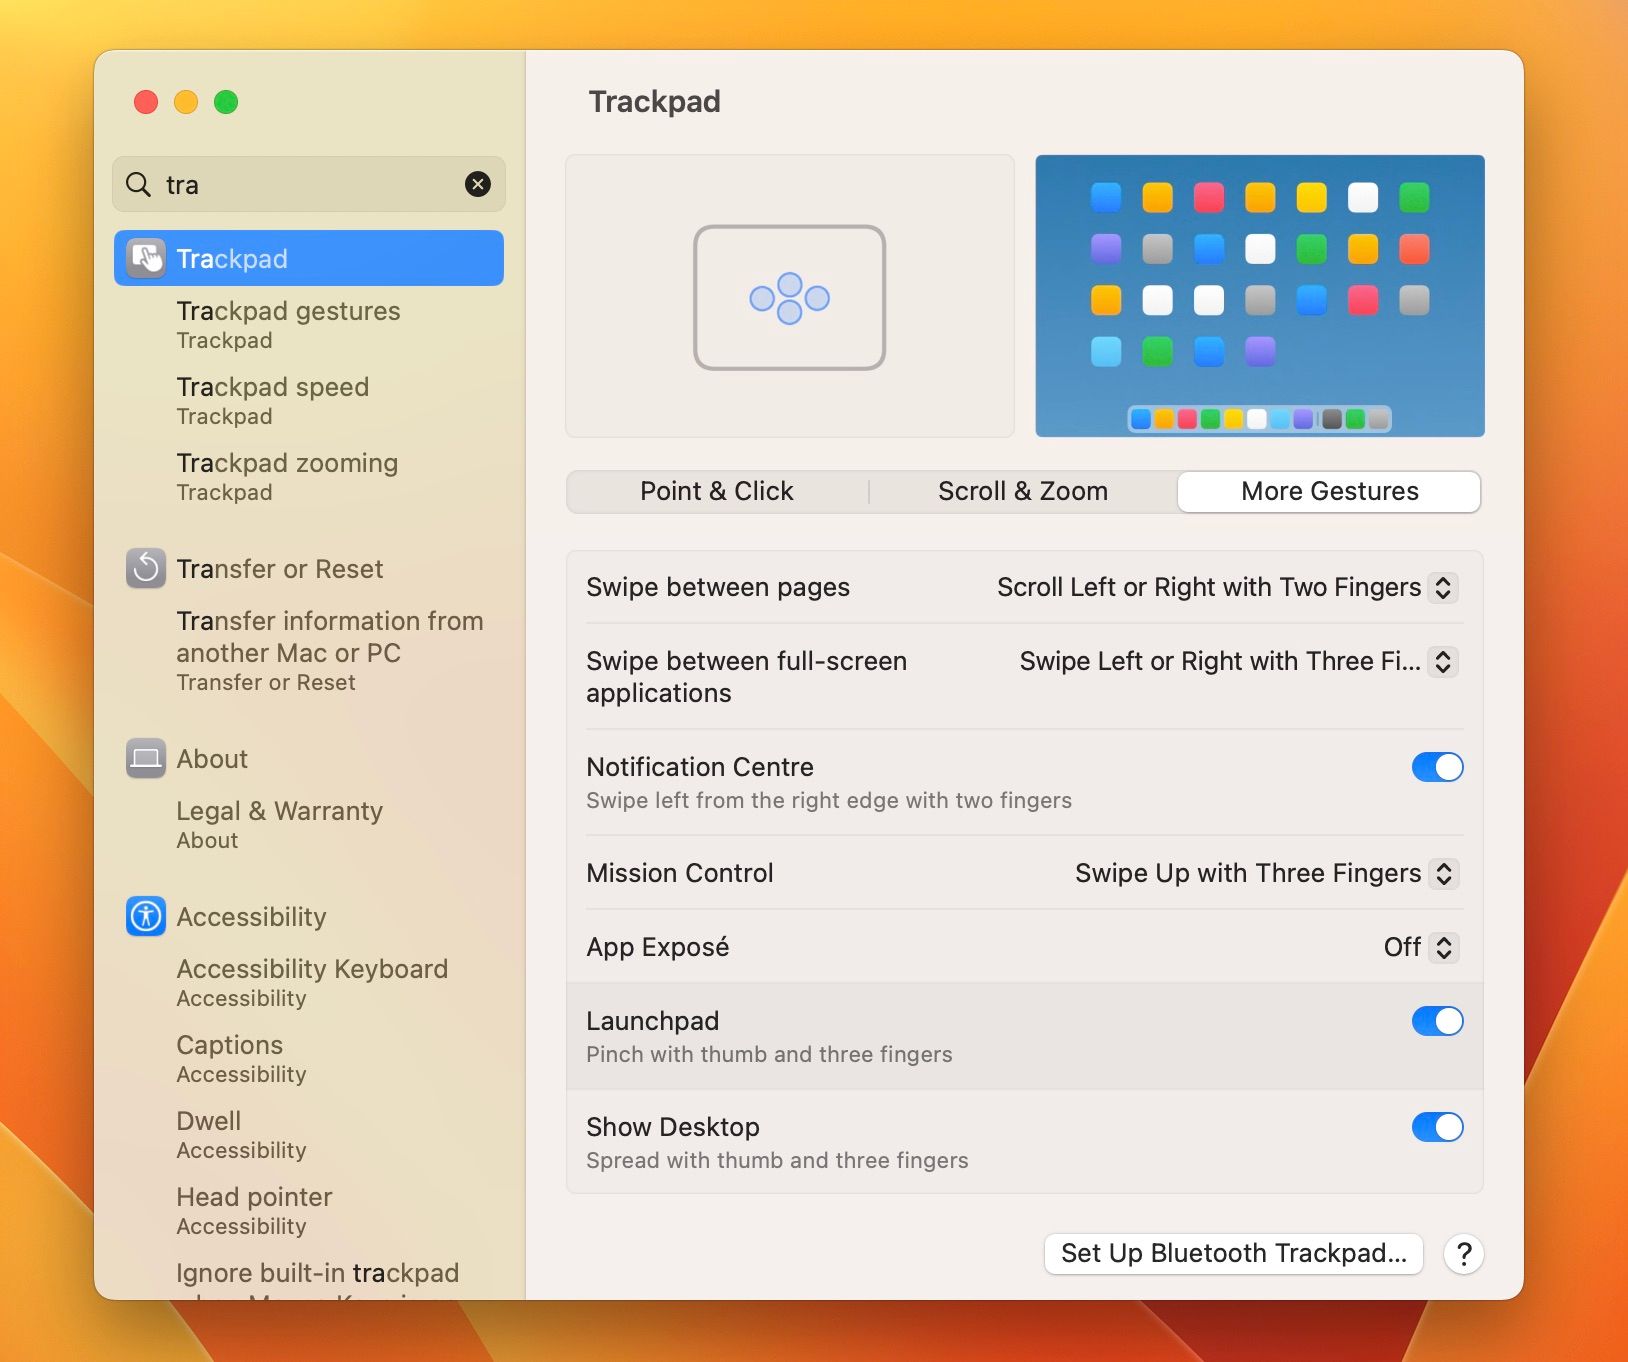 Trackpad gestures to open the launch pad